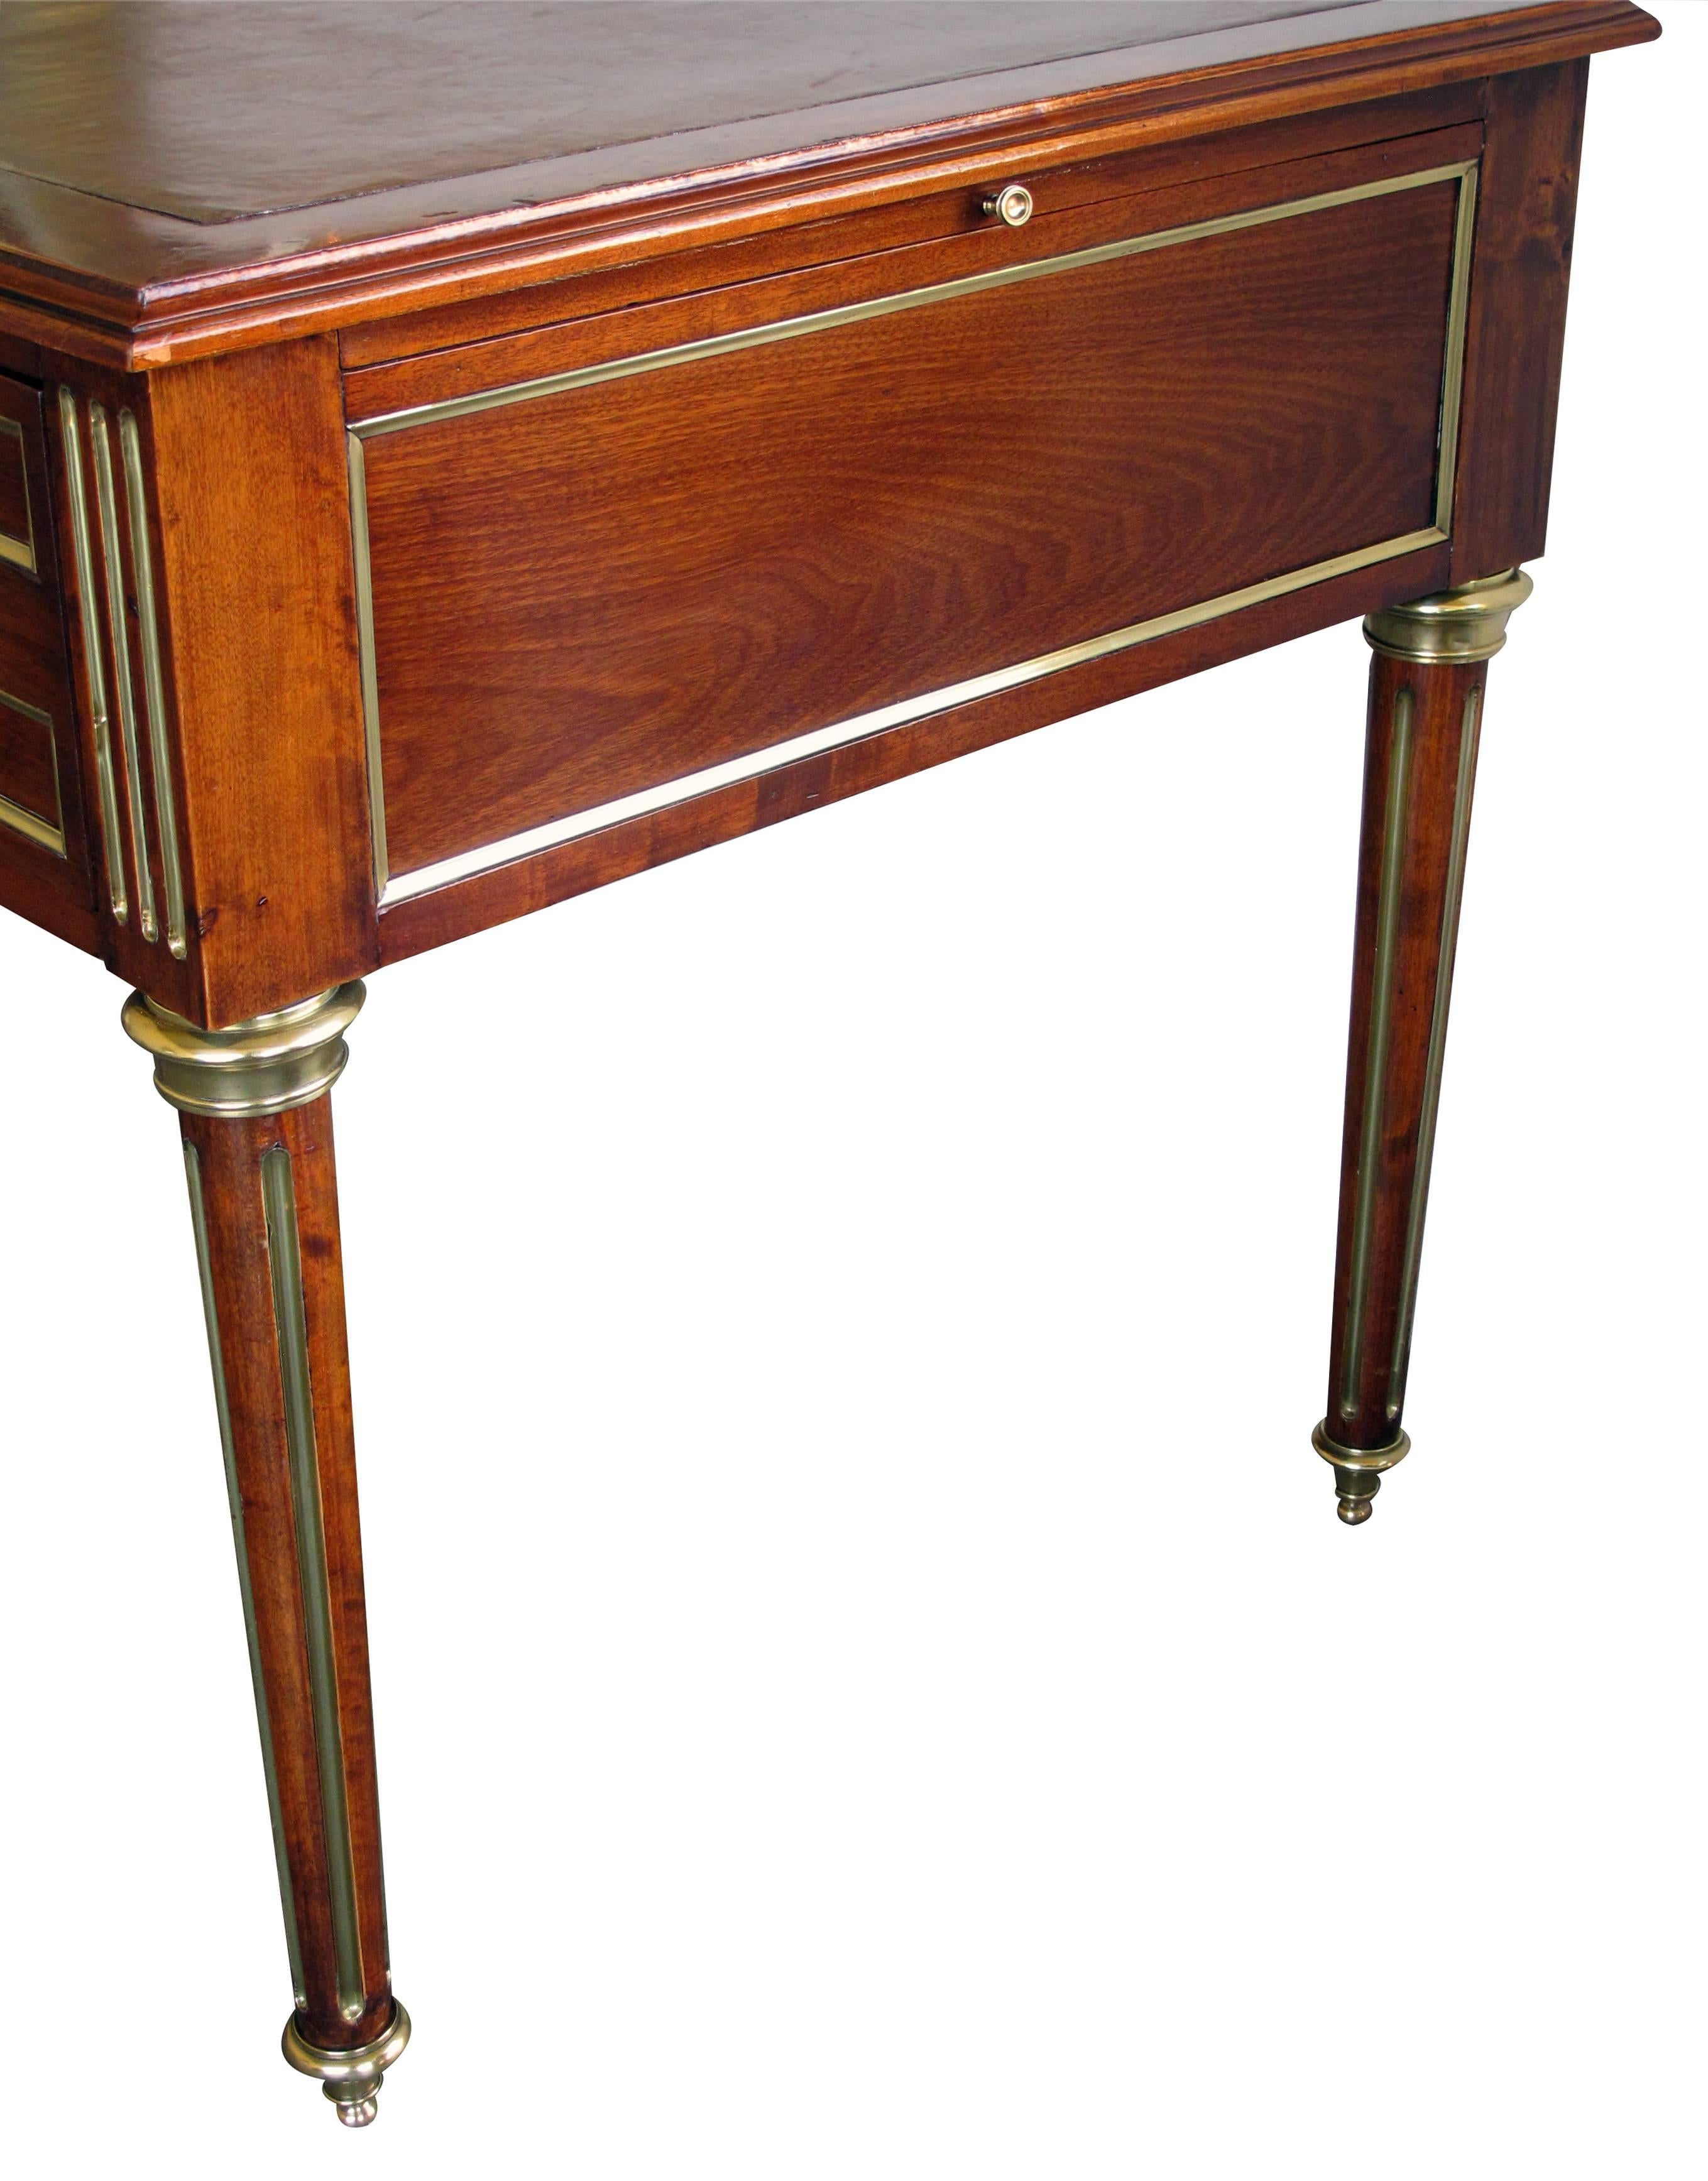 Late 19th Century Well-Crafted French Louis XVI Style Mahogany Four-Drawer Writing Desk